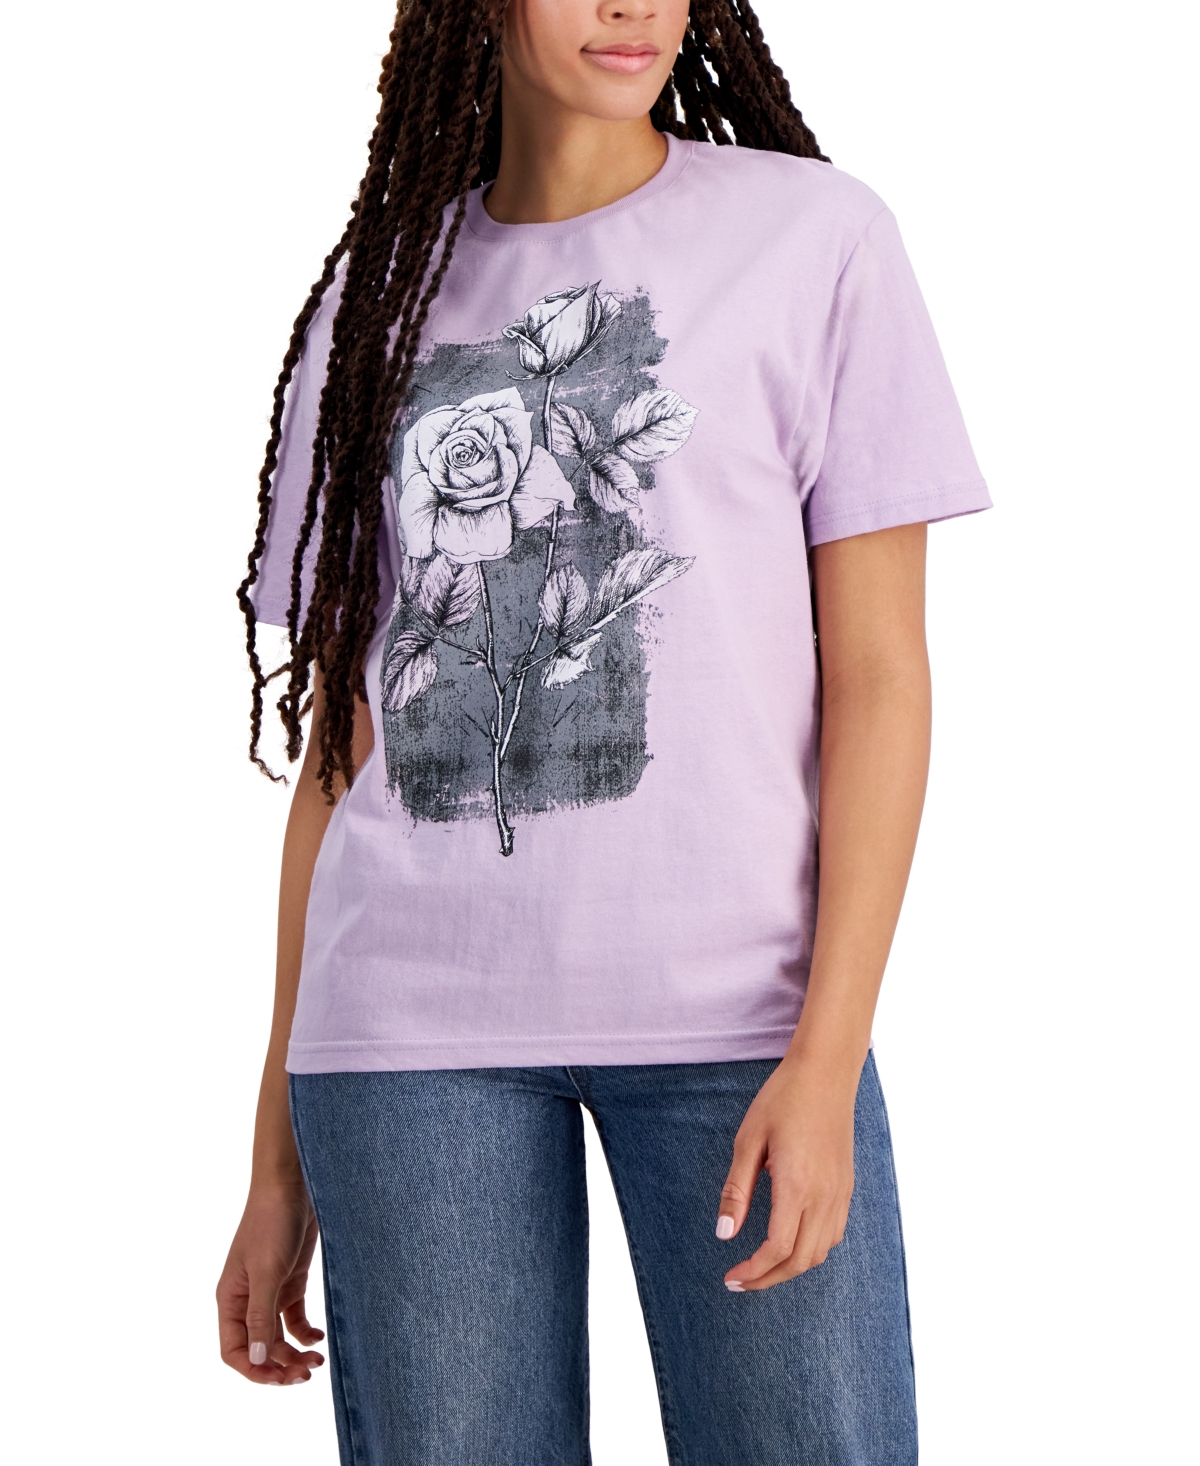 Juniors' Faded-Rose-Graphic Cotton T-Shirt - Fair Orchid